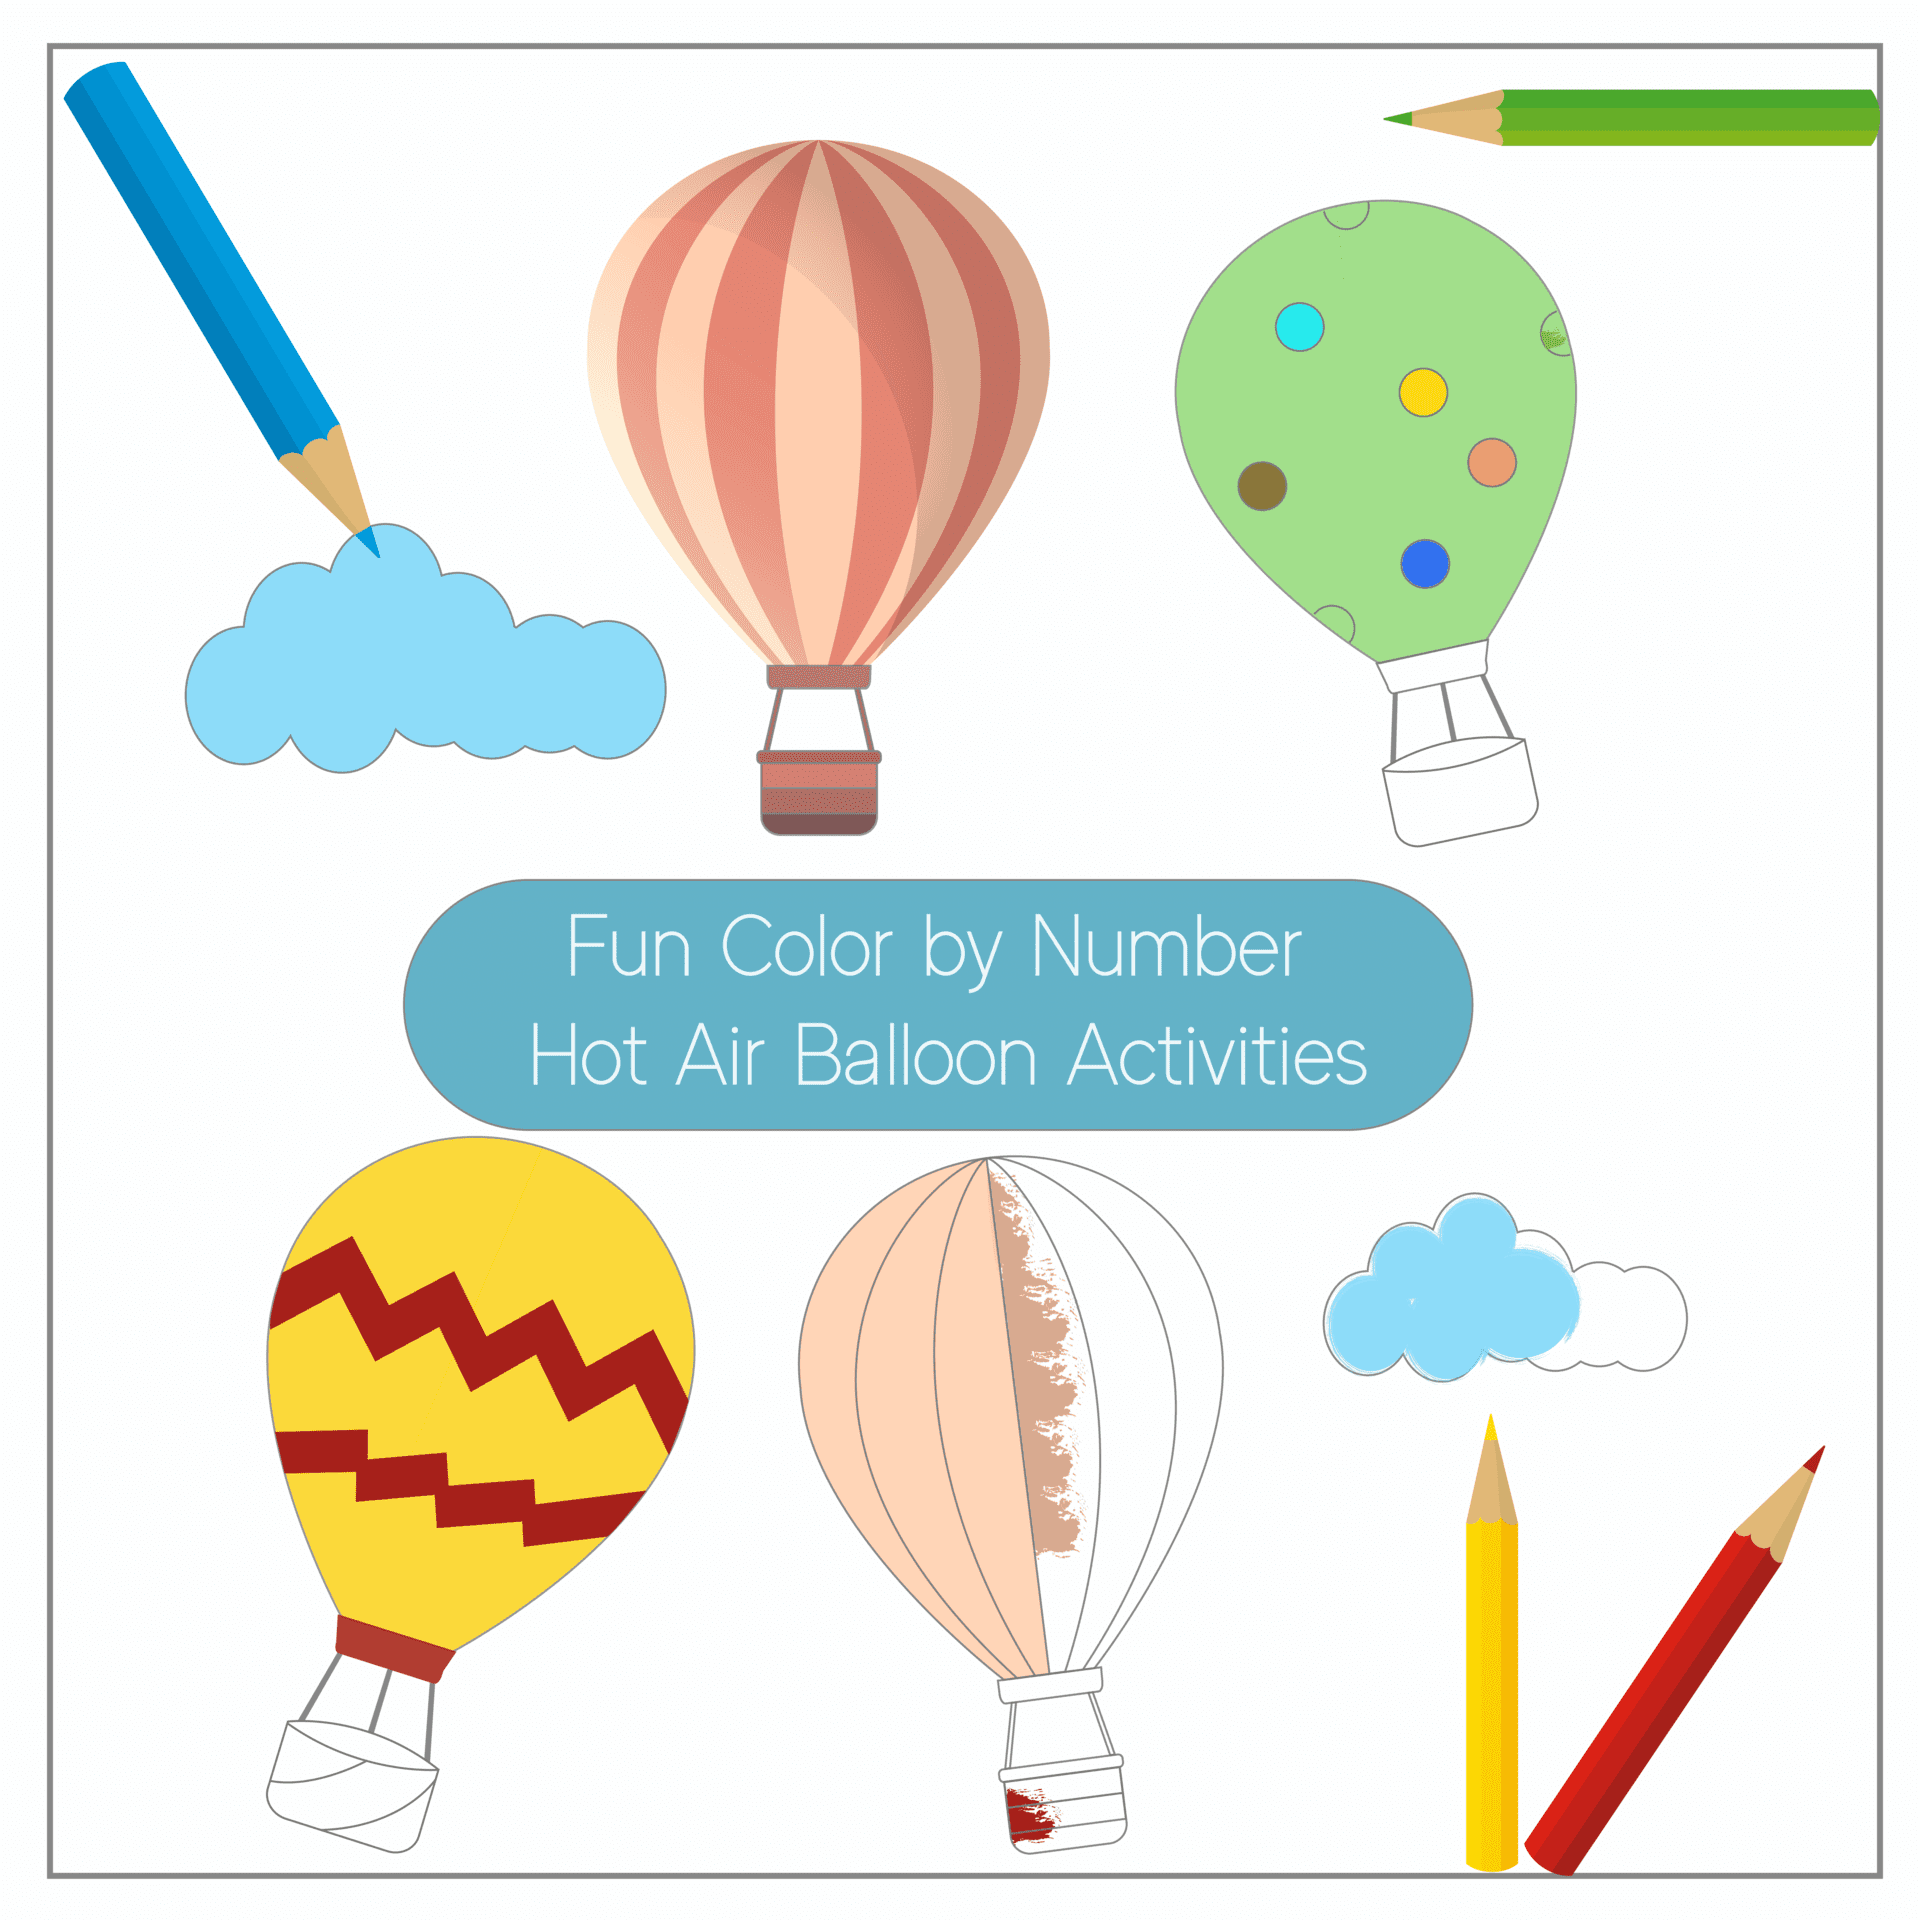 5 Fun Color by Number Hot Air Balloon Worksheets | Free Printable